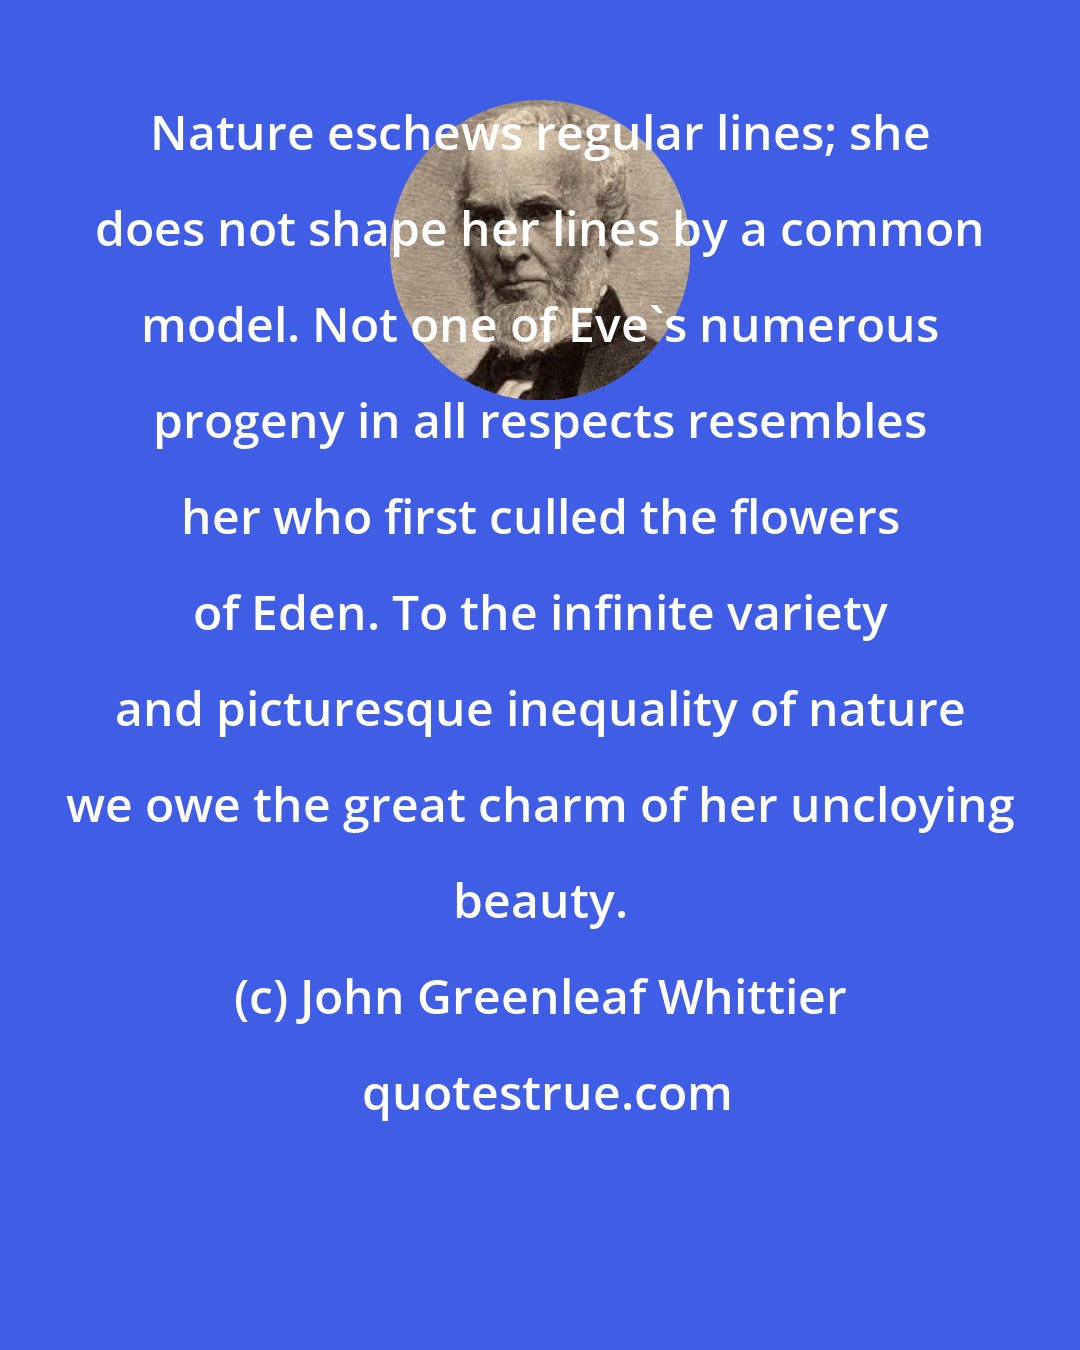 John Greenleaf Whittier: Nature eschews regular lines; she does not shape her lines by a common model. Not one of Eve's numerous progeny in all respects resembles her who first culled the flowers of Eden. To the infinite variety and picturesque inequality of nature we owe the great charm of her uncloying beauty.